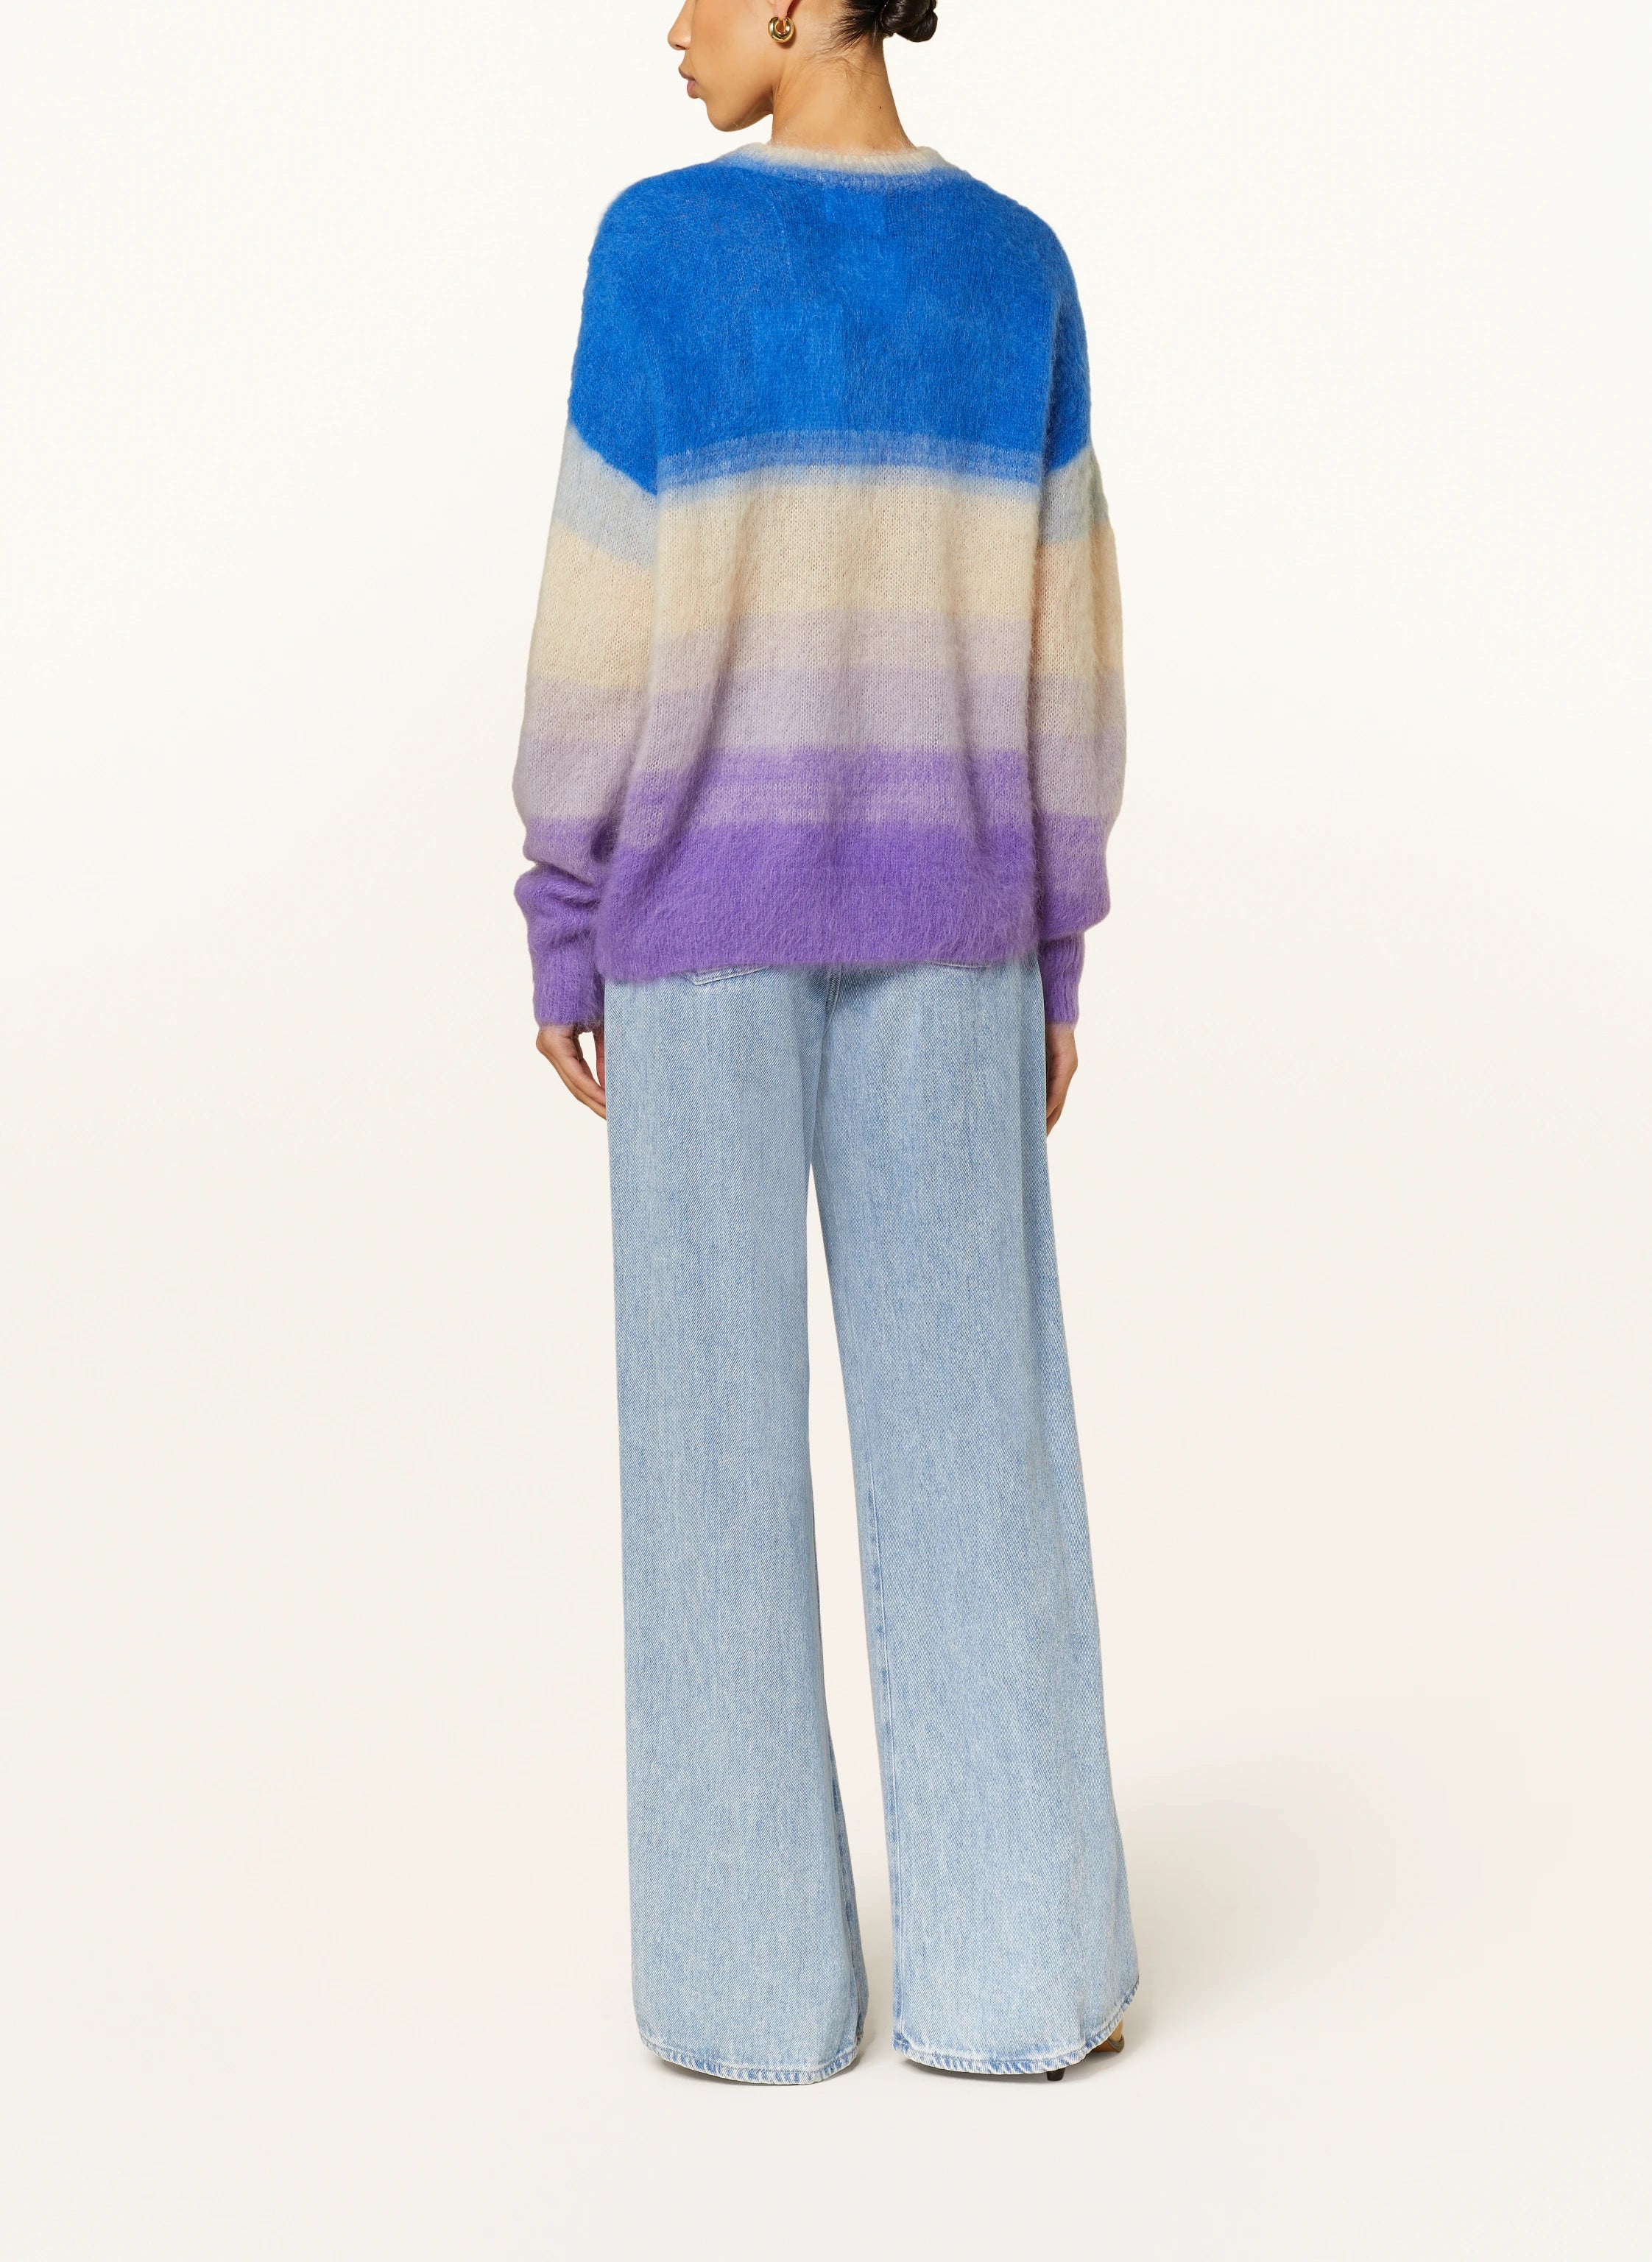 Isabel Marant Drussell Mohair Sweater - Blue/Purple